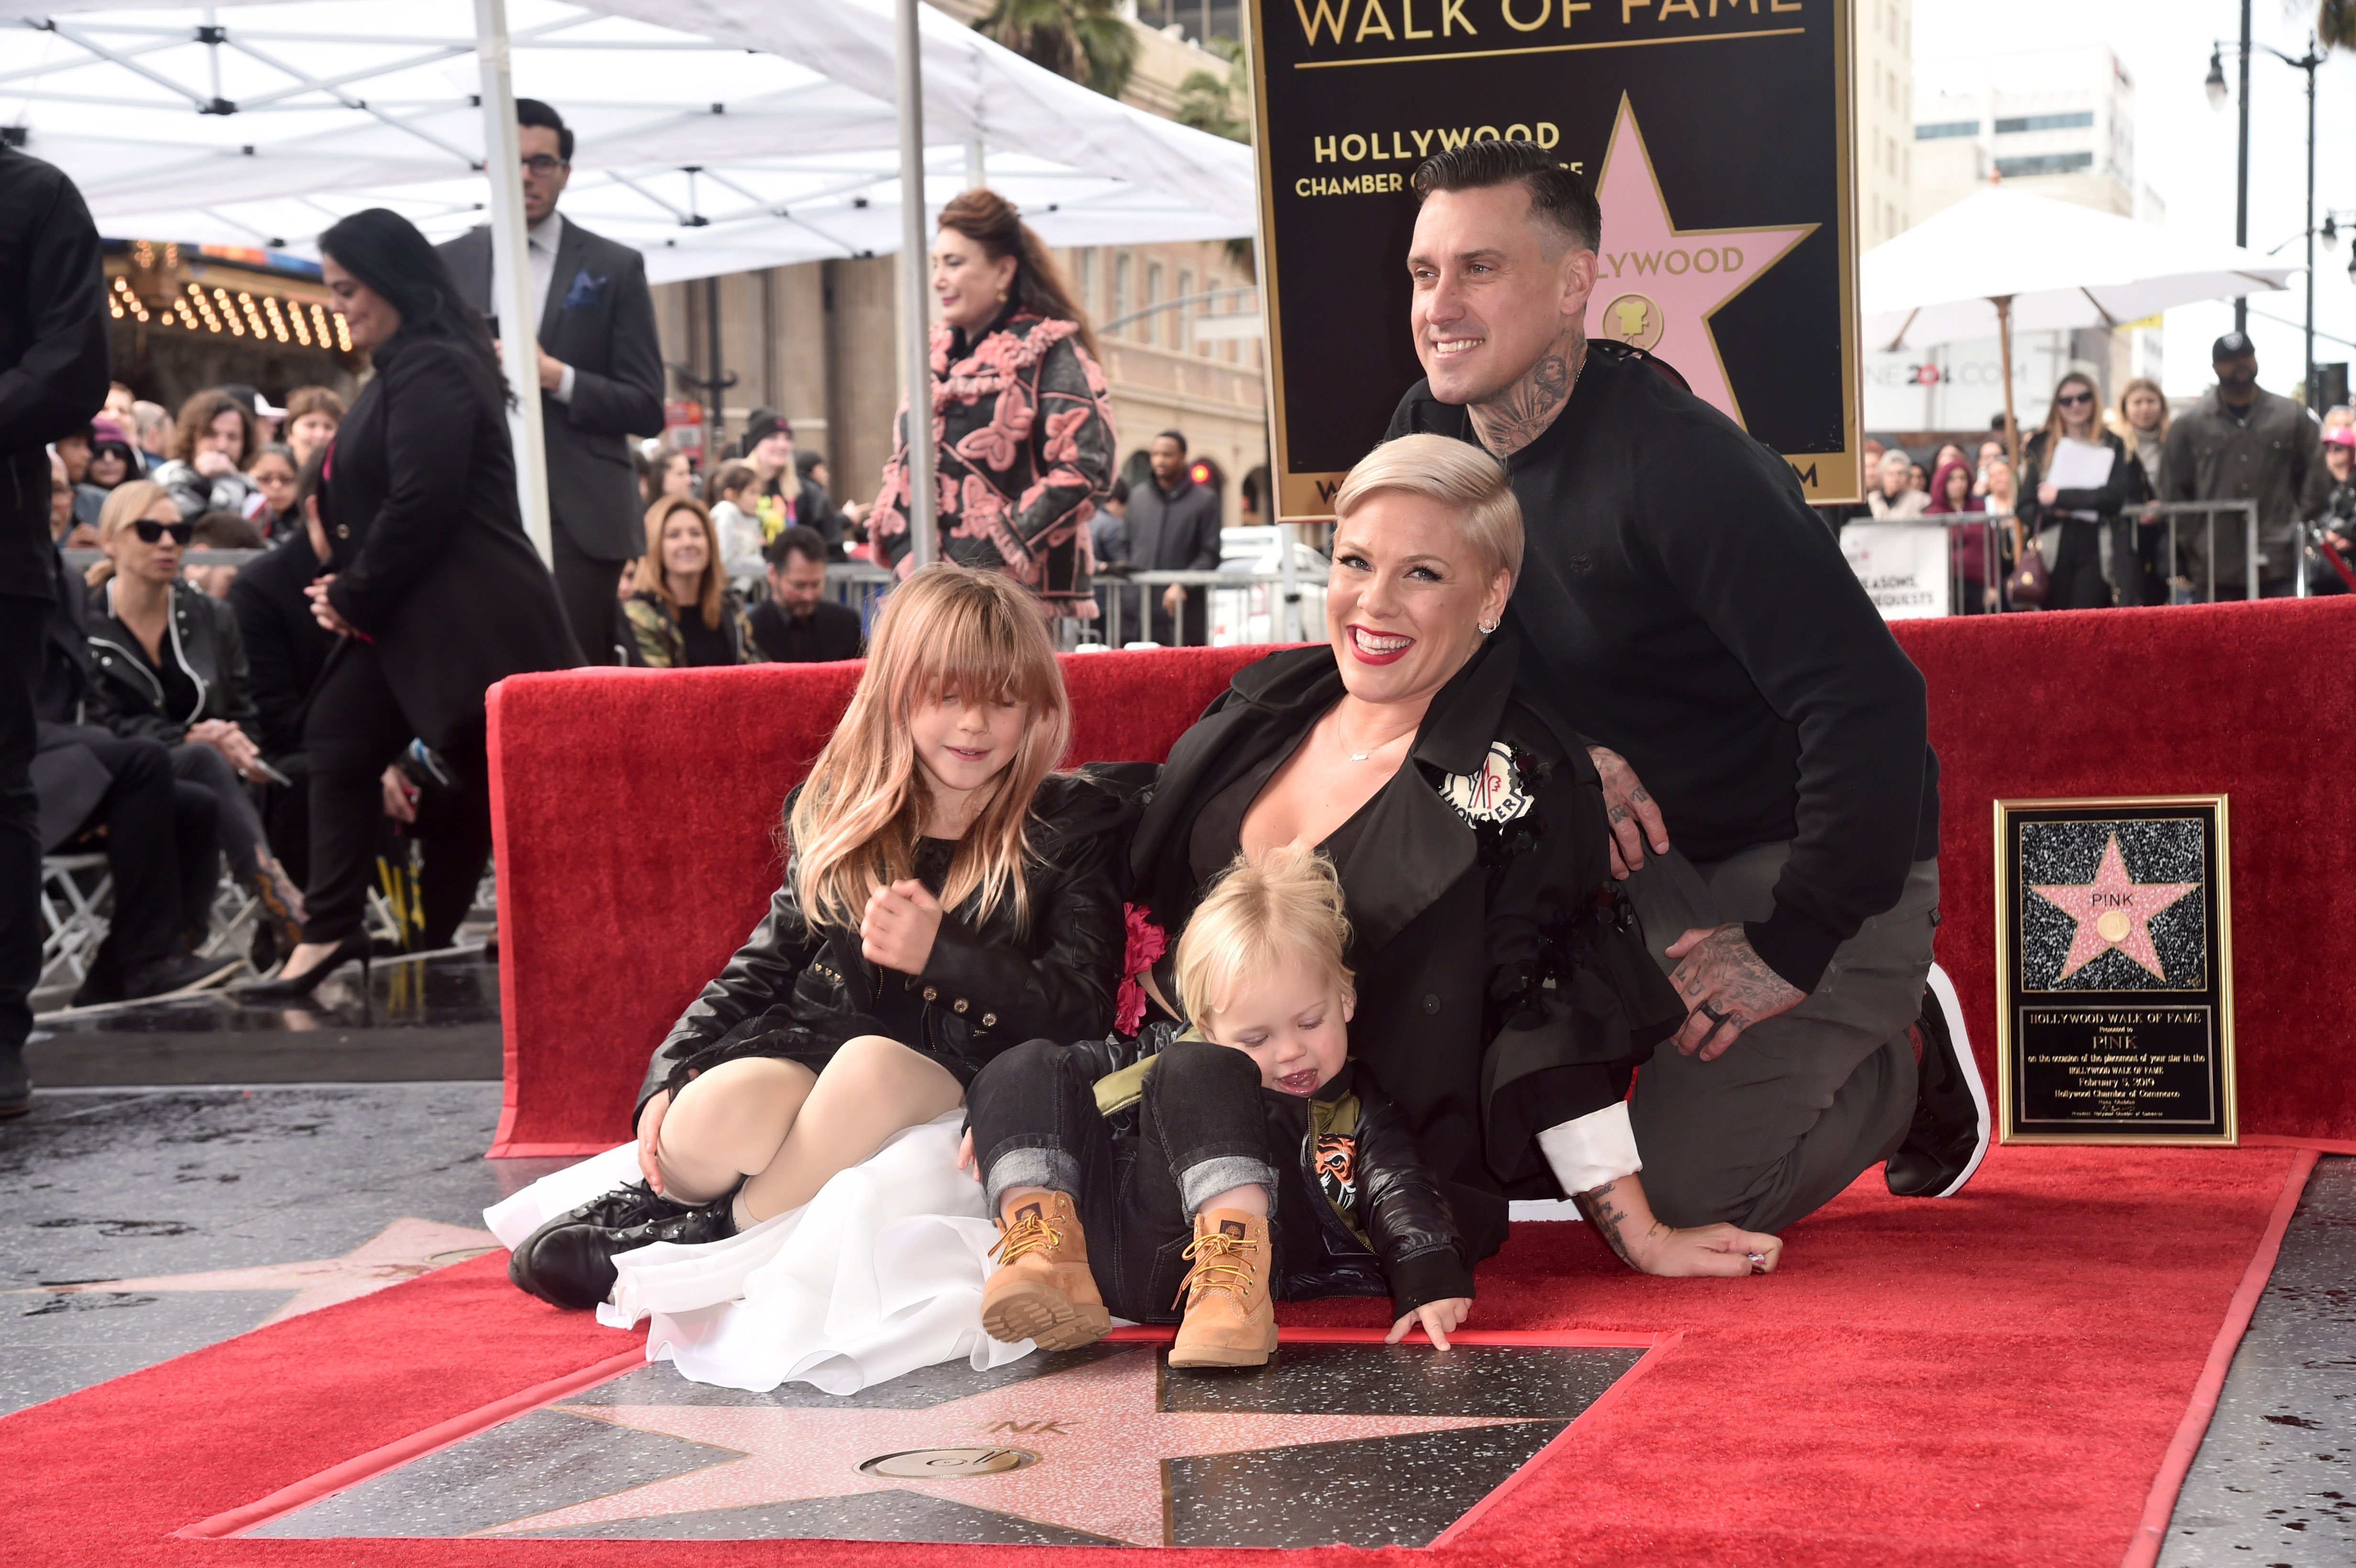 Pink celebrating with her family as she is honored with a Hollywood Walk of Fame star in February 2019 | Photo: Getty Images